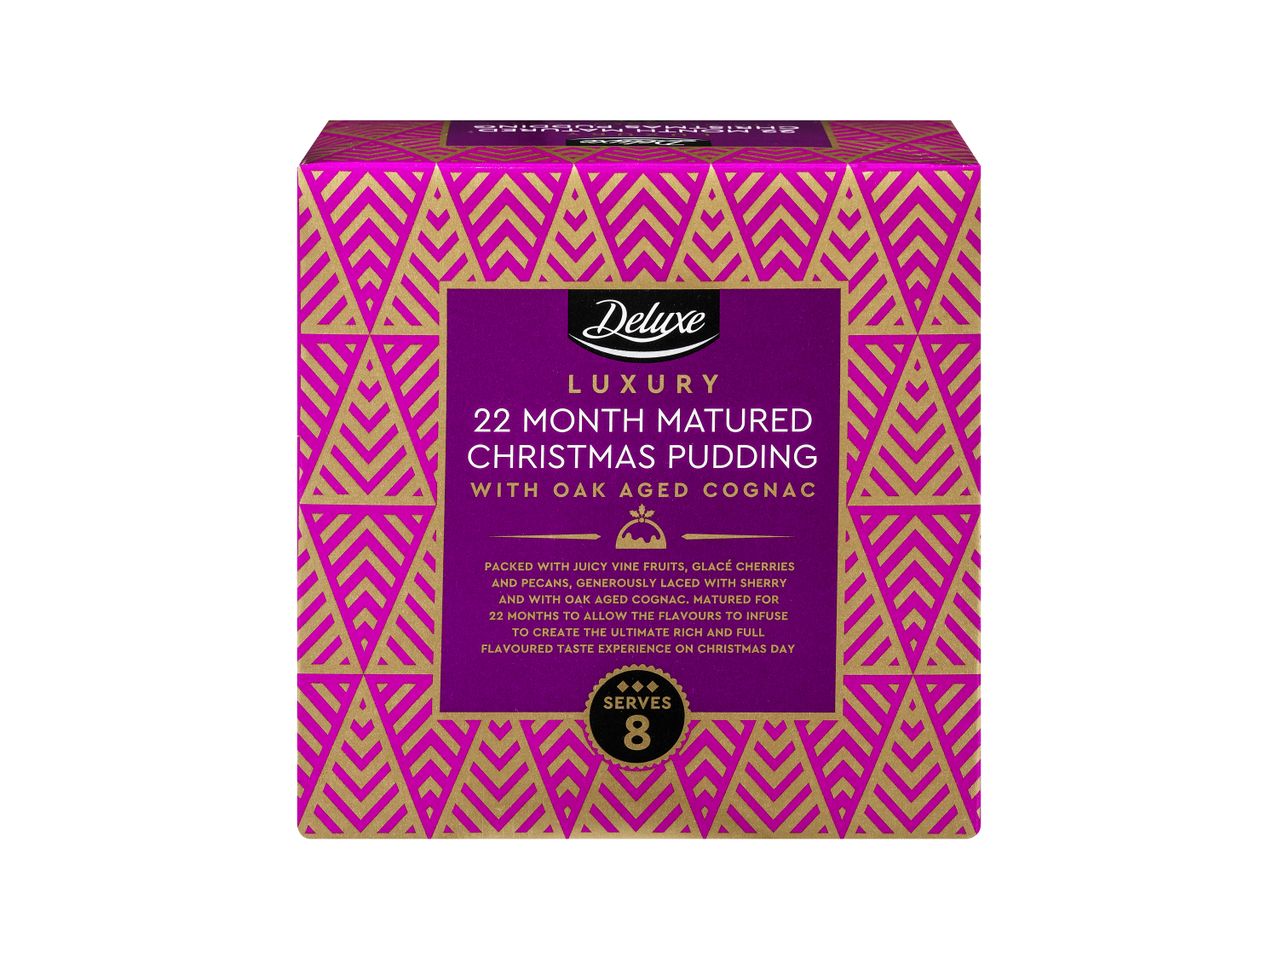 Go to full screen view: Deluxe 22 Month Matured Christmas Pudding - Image 1